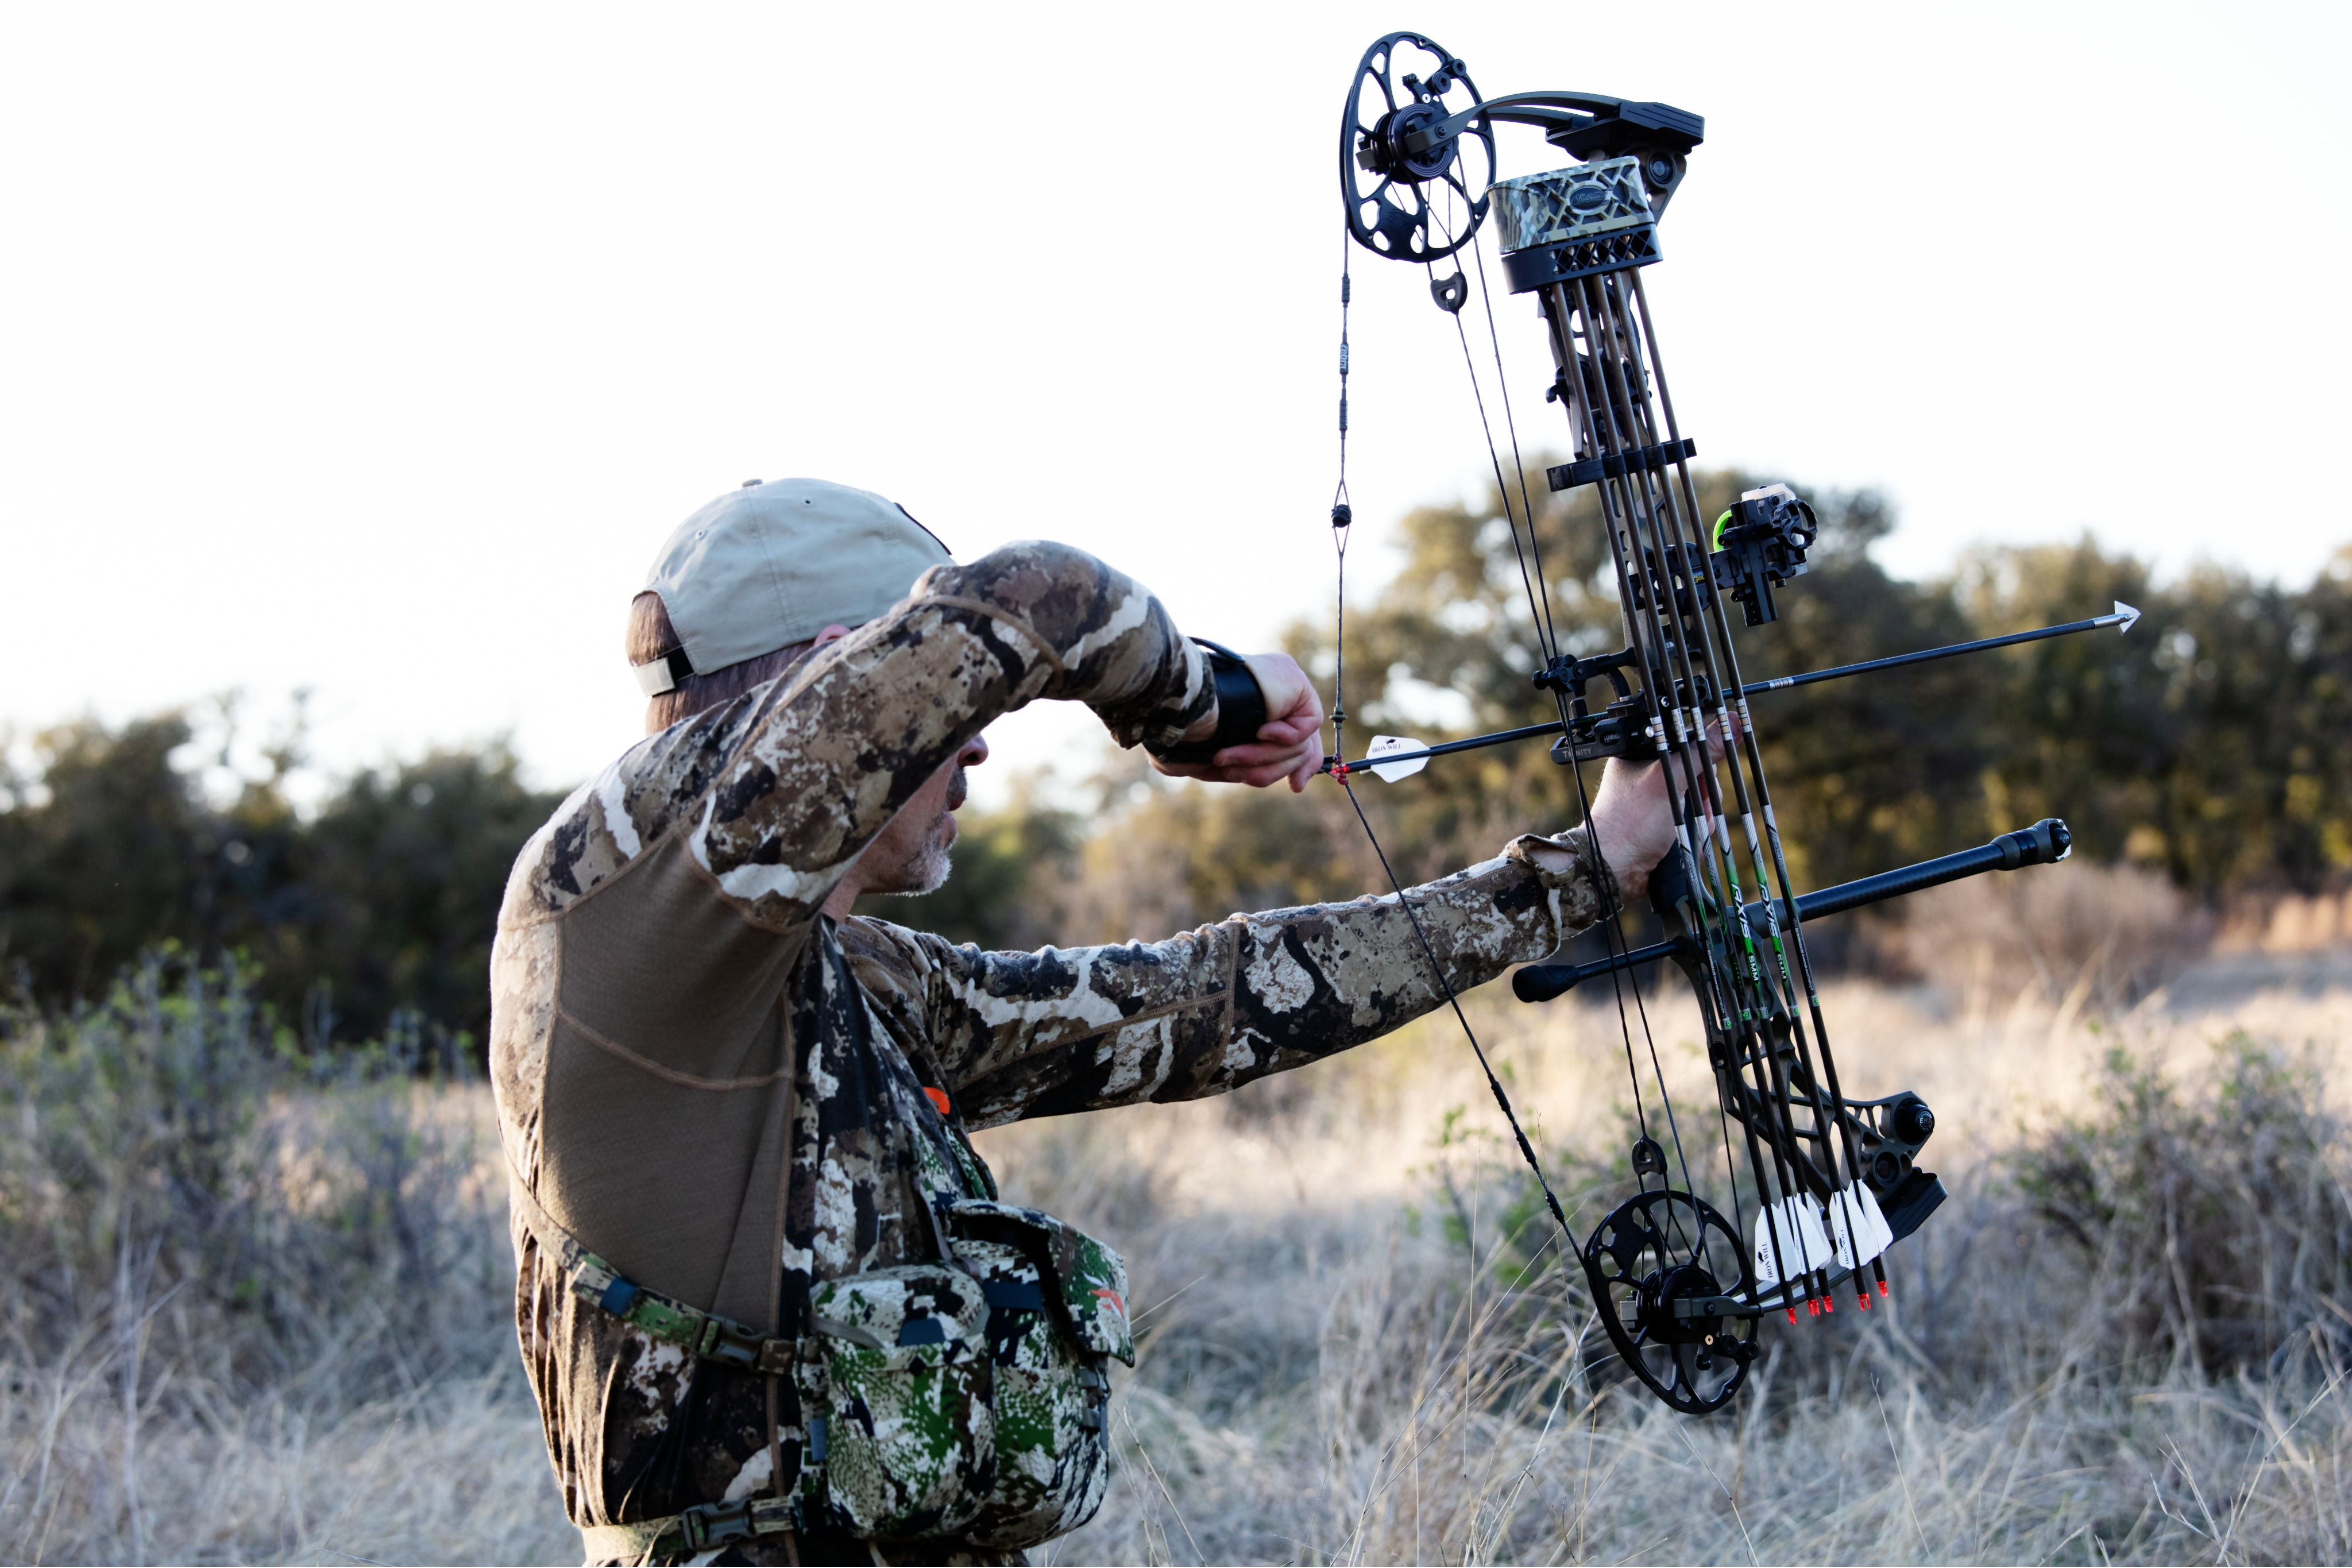 
An Interview with Bill VanderHeyden on Arrow Building for Hunting